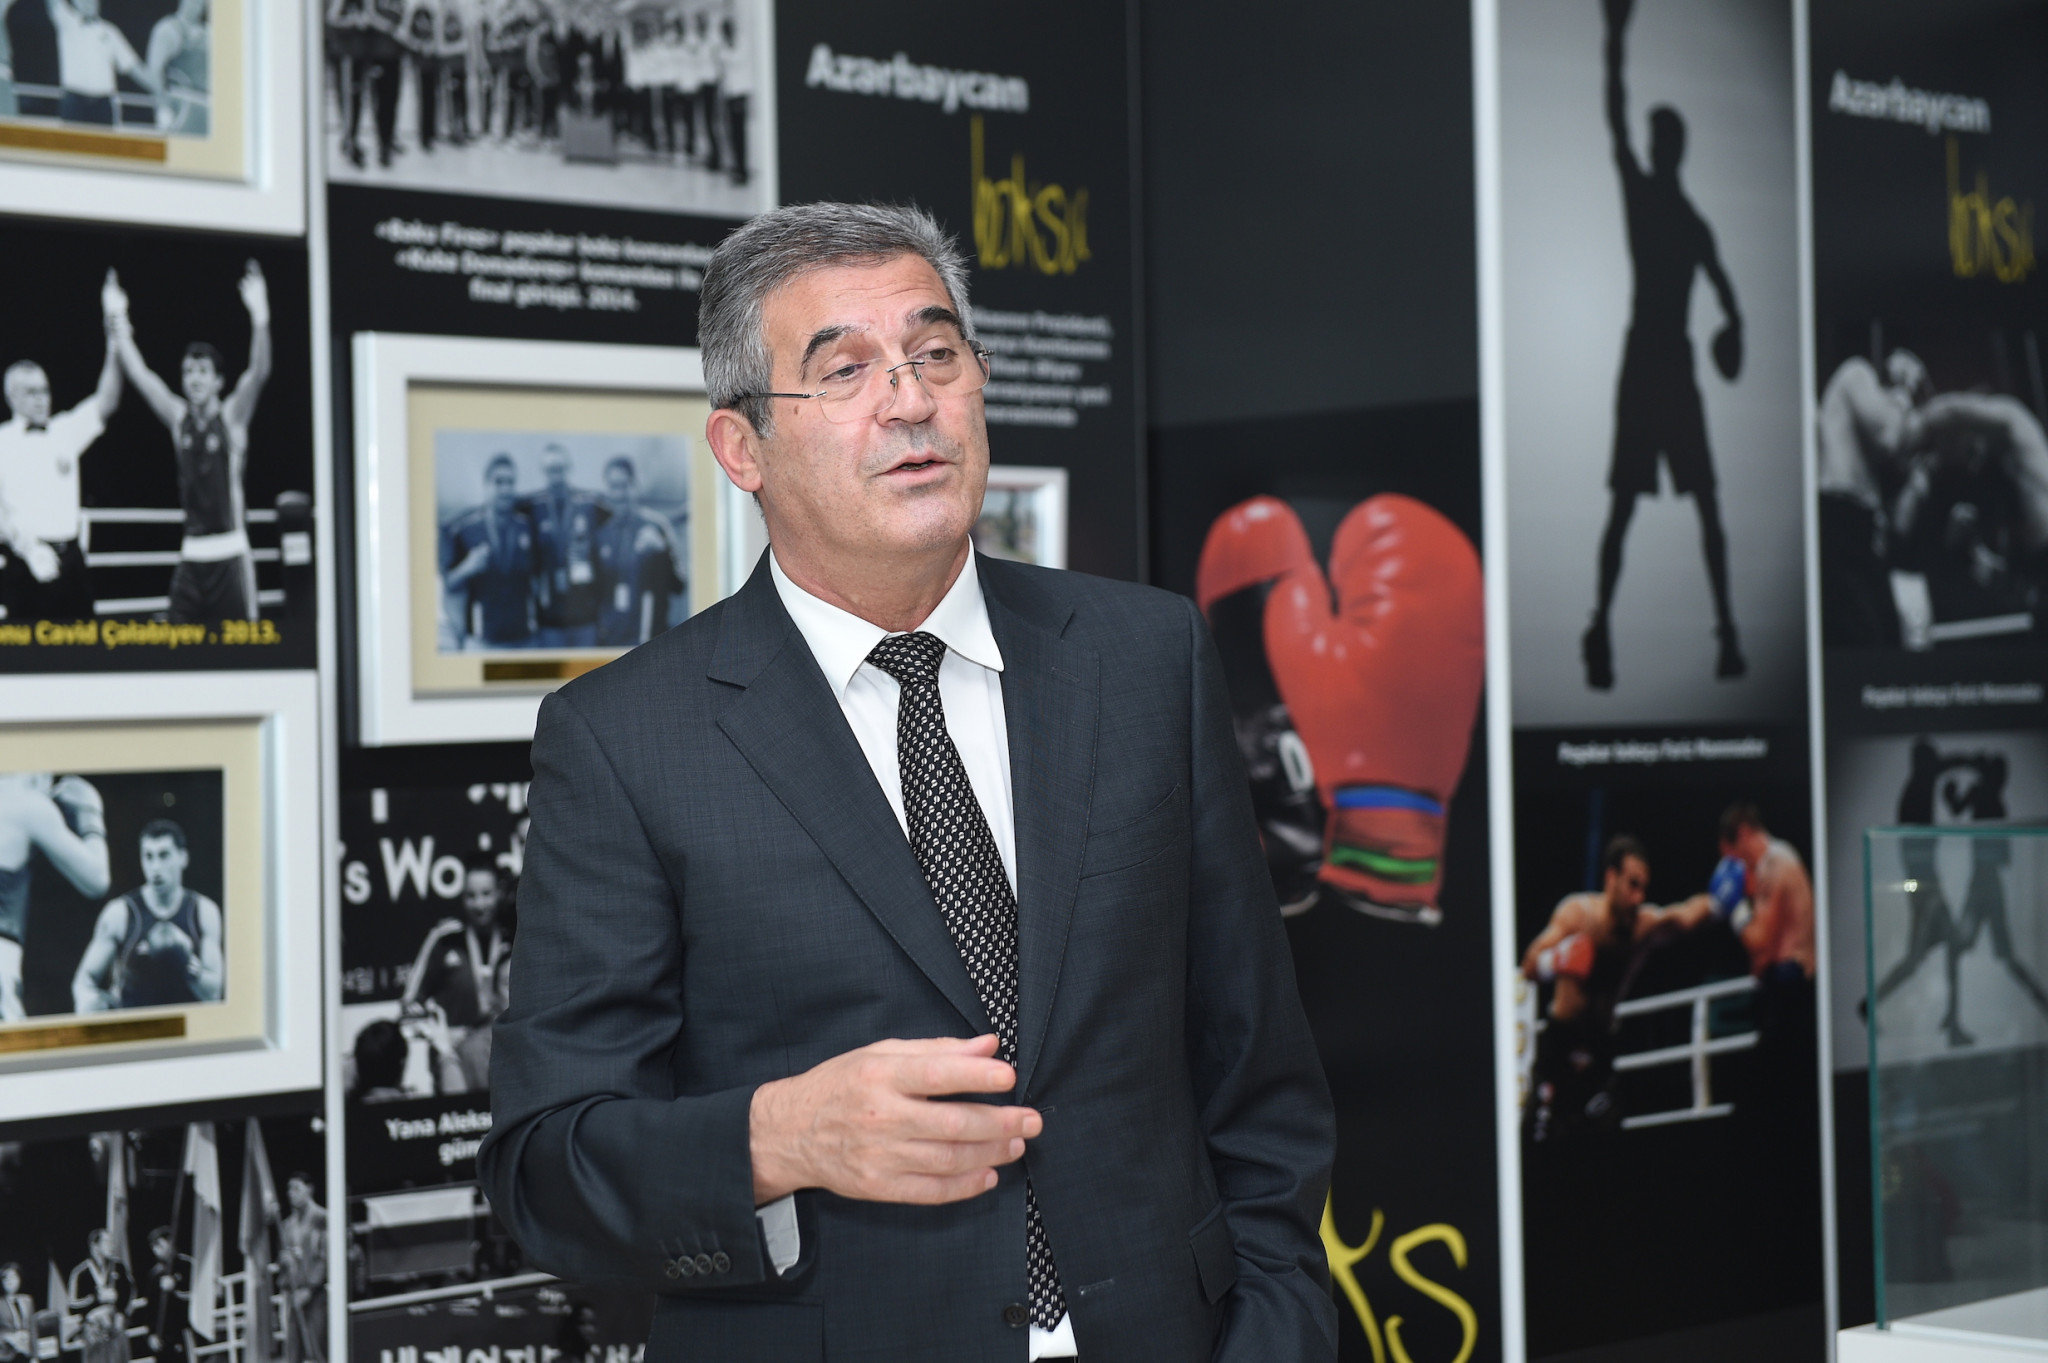 Mikayilov outlines vision for International Boxing Association in Presidential election manifesto